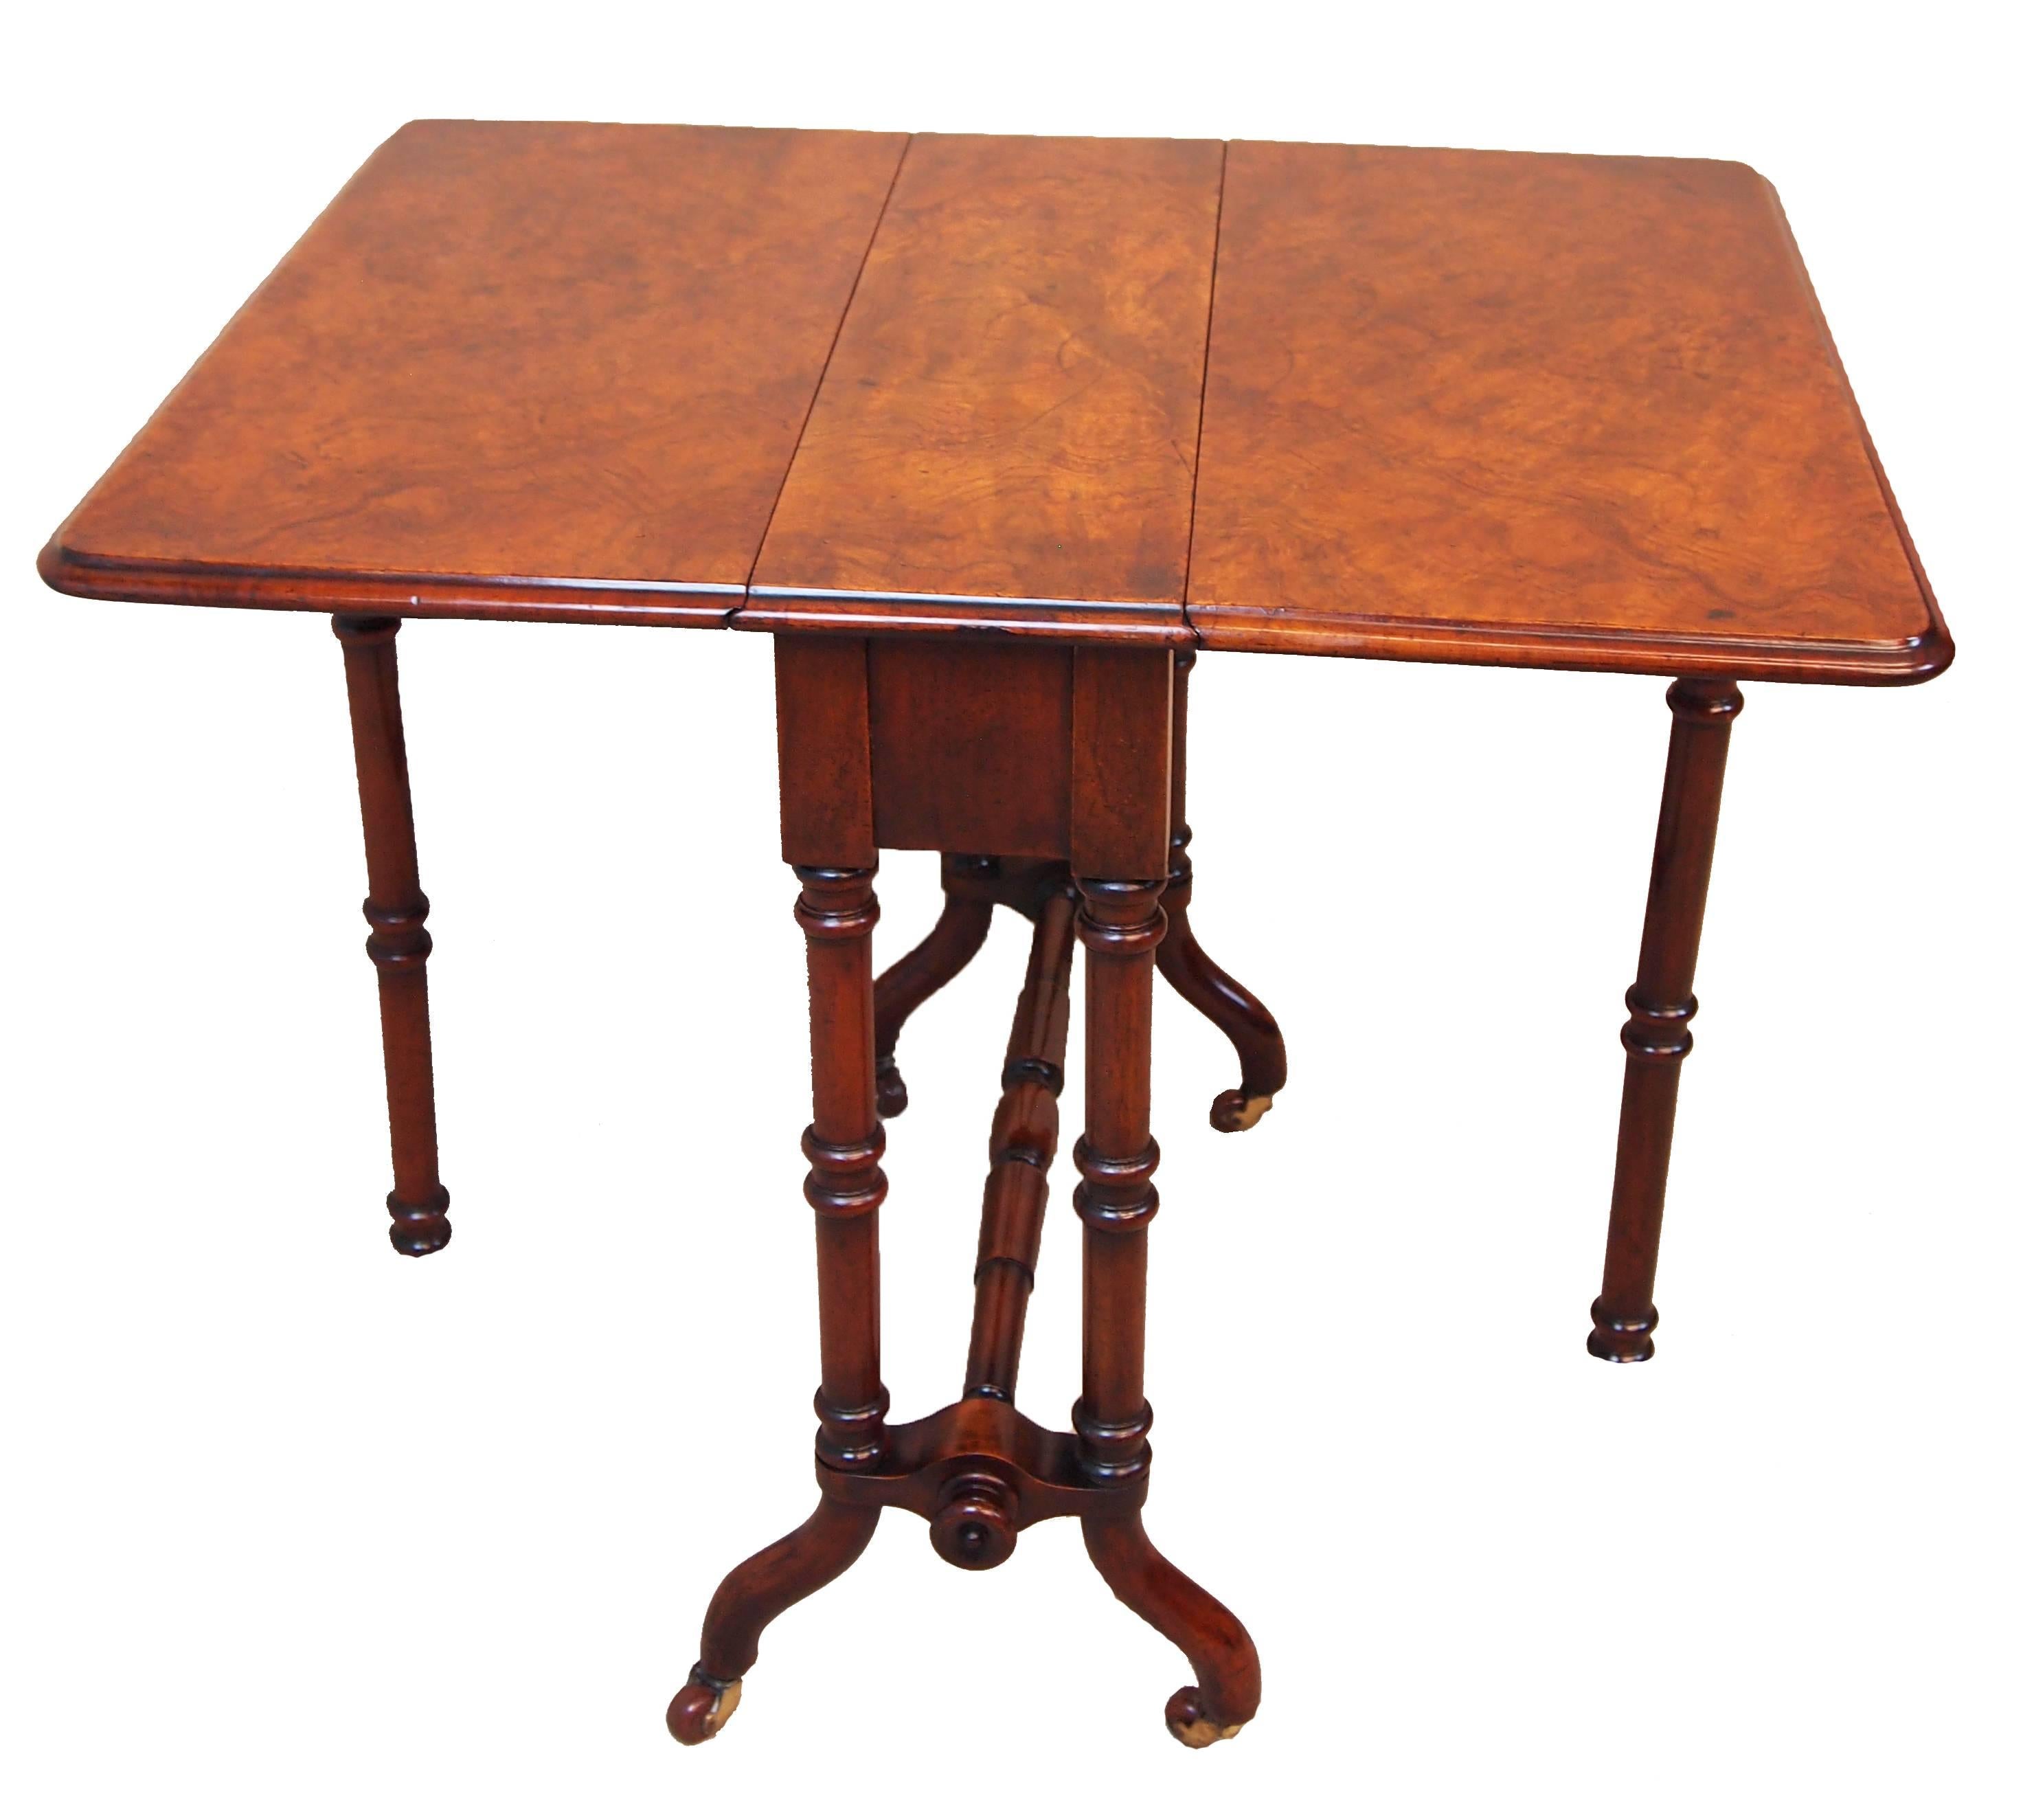 A very good quality late 19th century burr walnut baby
Sutherland table having superbly figured two flap
Top raised on elegant turned upright supports and
Splayed legs

circa 1870

Measures: Height - 23.5in
Width - 7.5in (flaps down)
Width